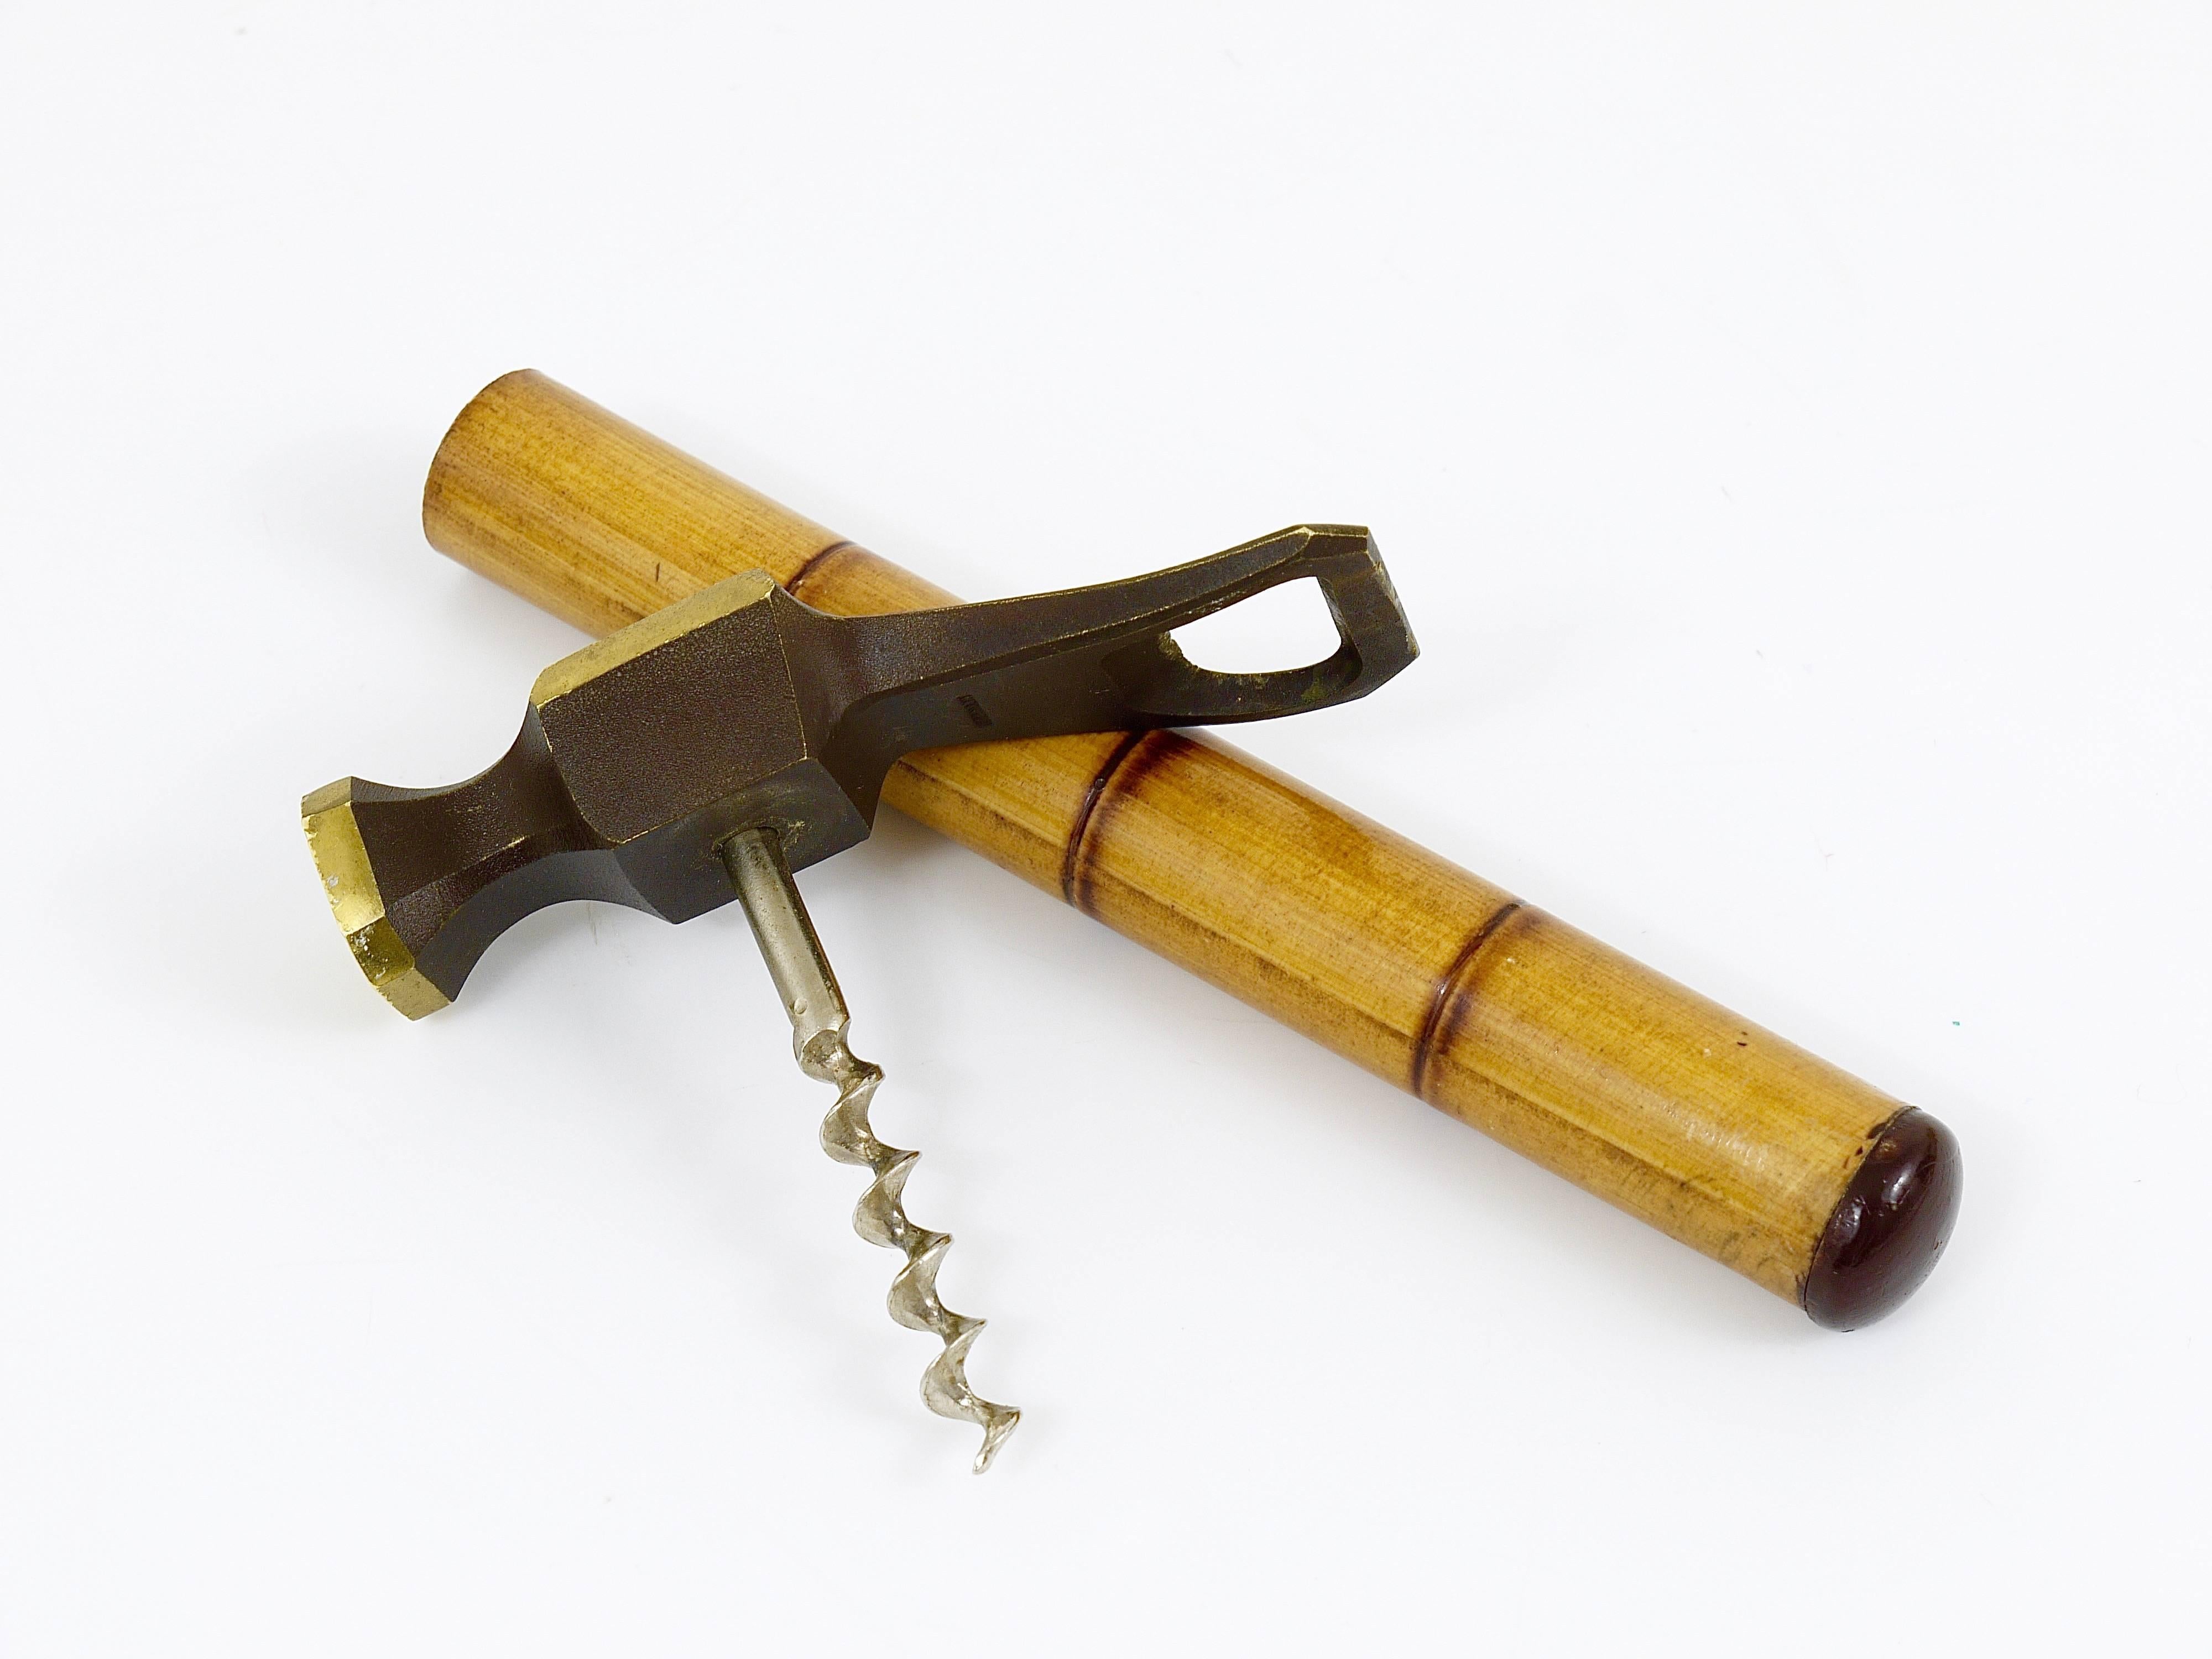 An unusual modernist bottle opener in the shape of a Hammer. Made of brass with a nice bamboo handle. Made in Germany in the 1950s. In good condition. A very outstanding piece.